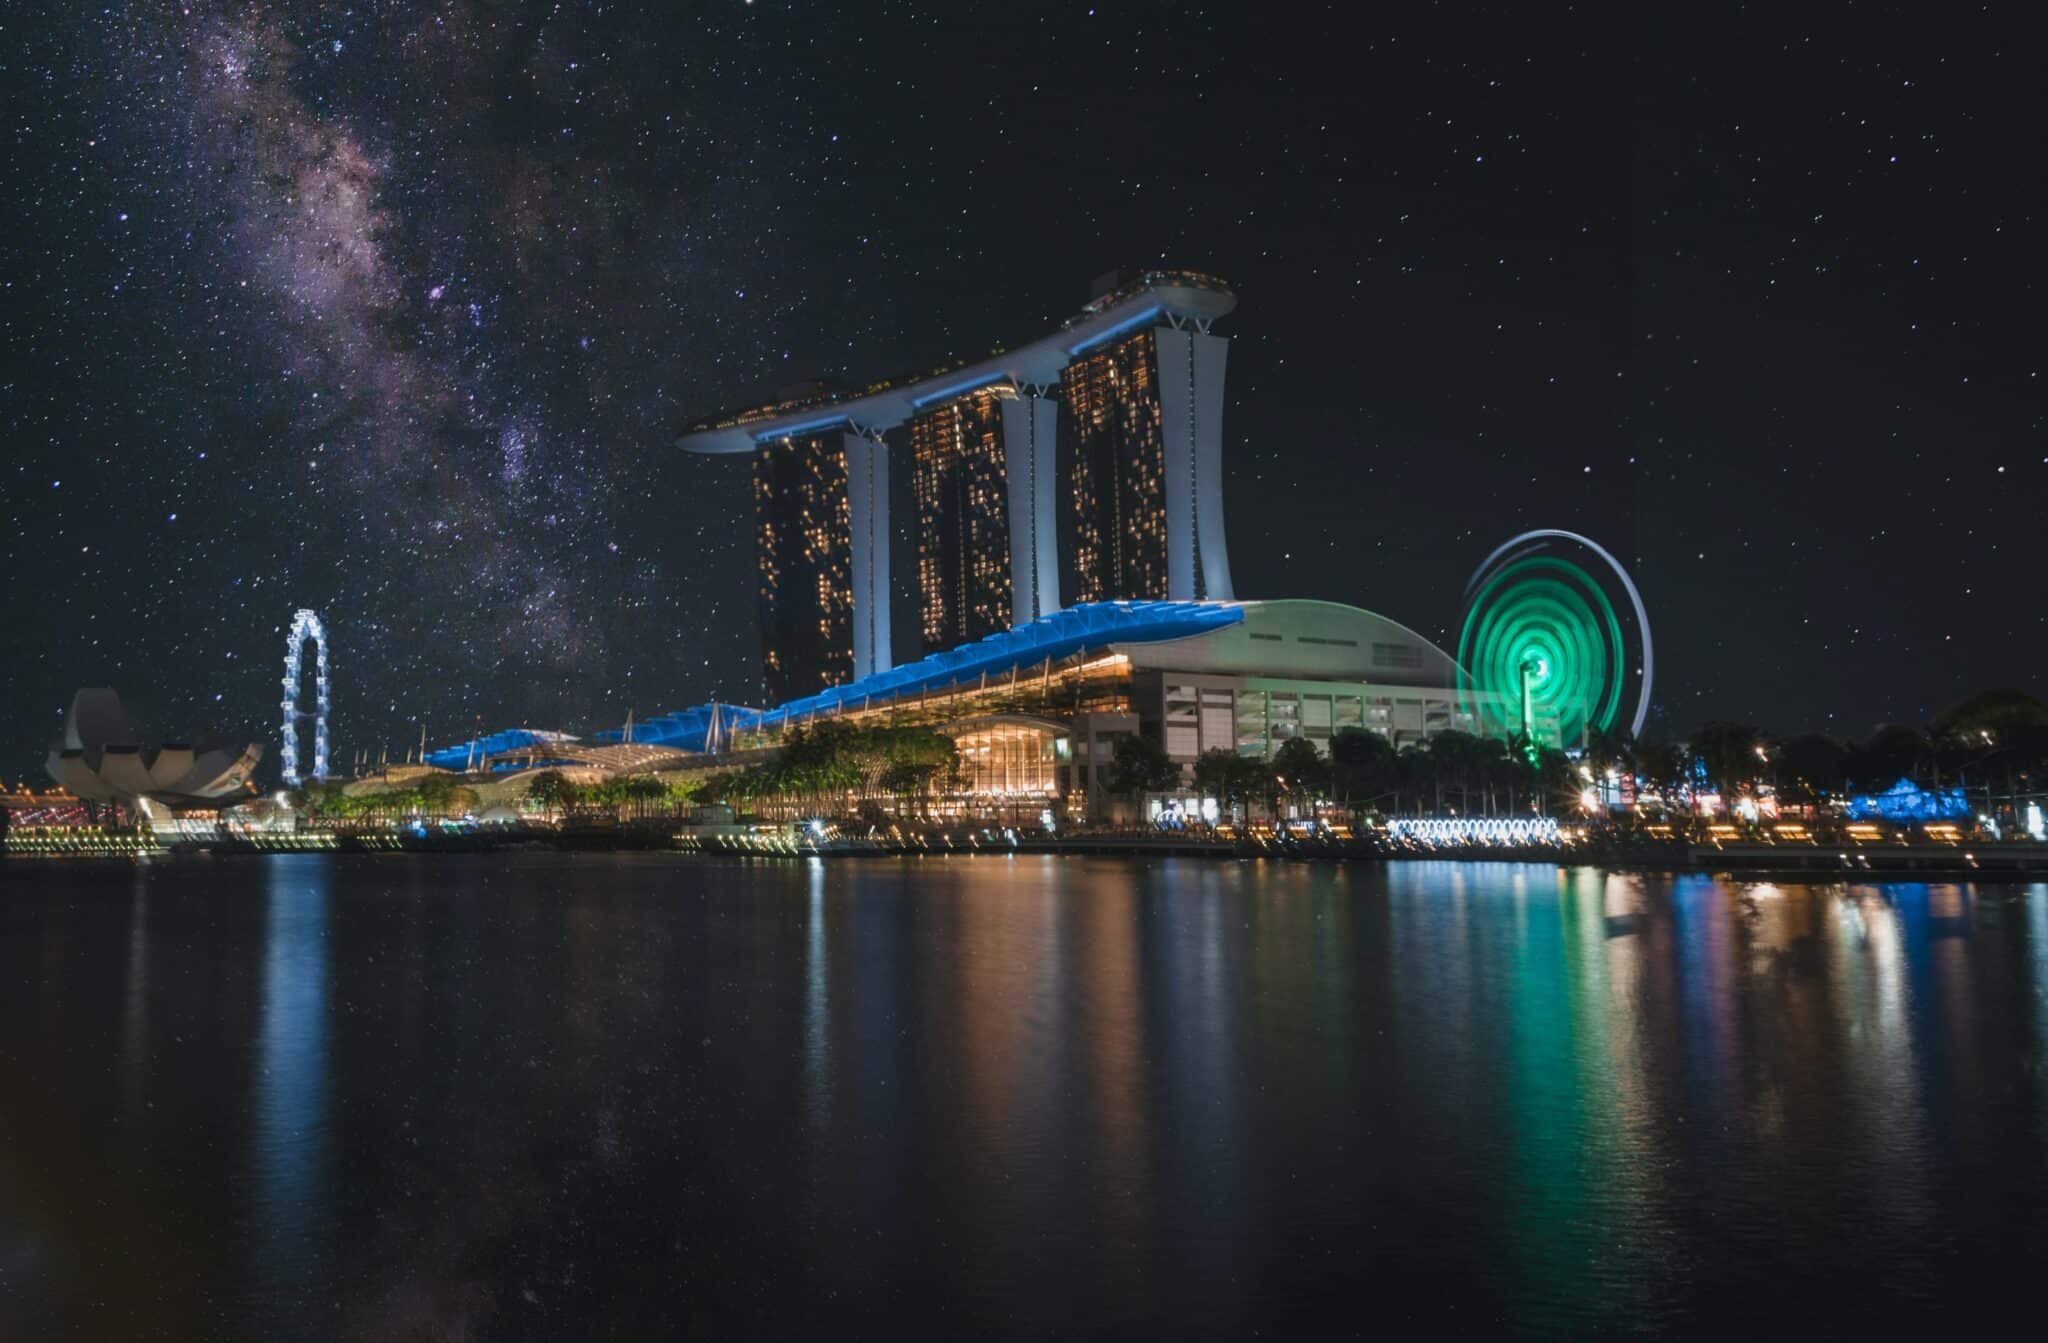 What Are The Top 21 Singapore Facts You Should Know Before Visiting